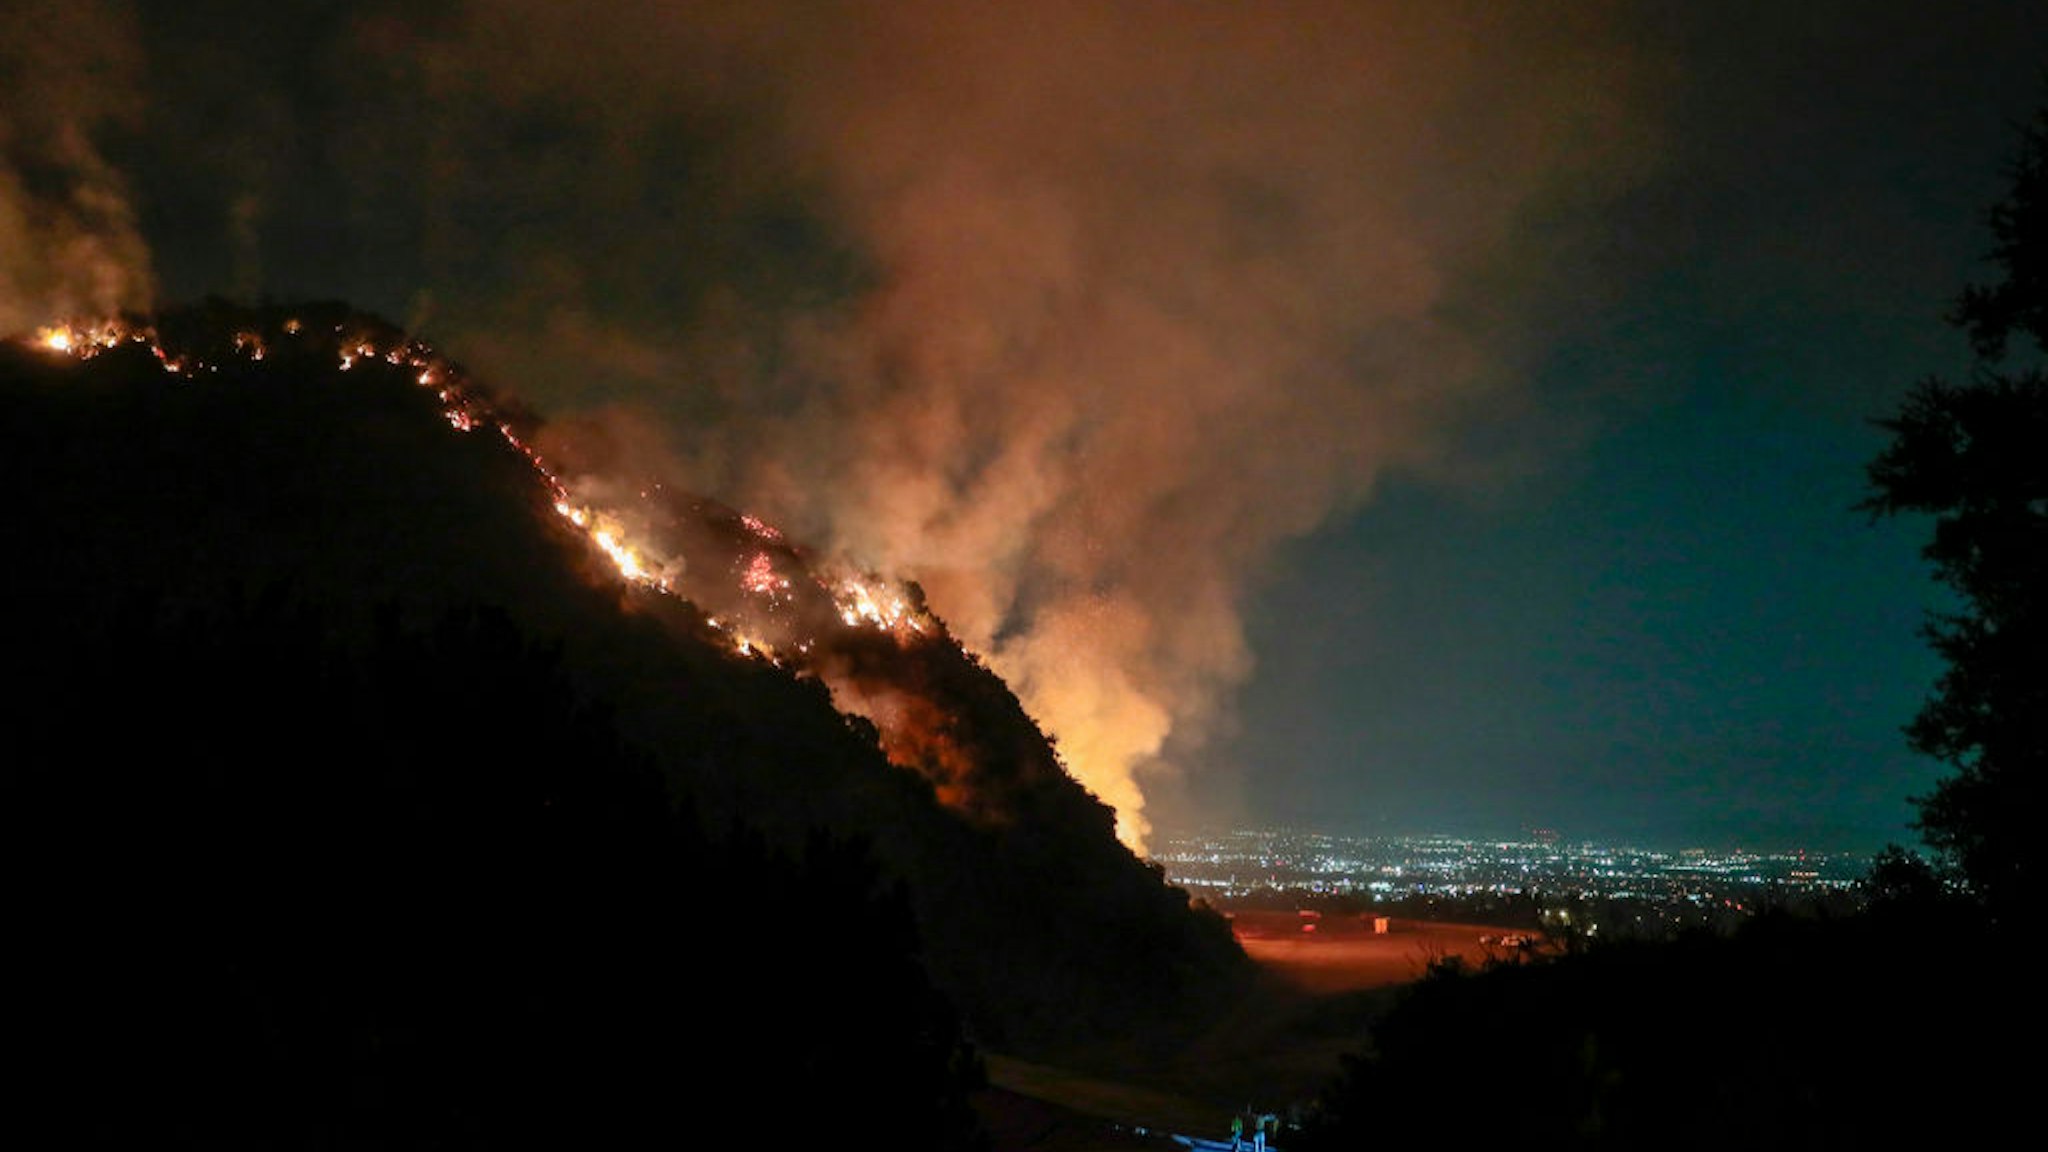 Firefighters look on from Sawpit Canyon as a control burn fires on a hillside overlooking the San Gabriel Valley as the Bobcat Fire continues to burn into its second week. (Robert Gauthier/ Los Angeles Times via Getty Images)